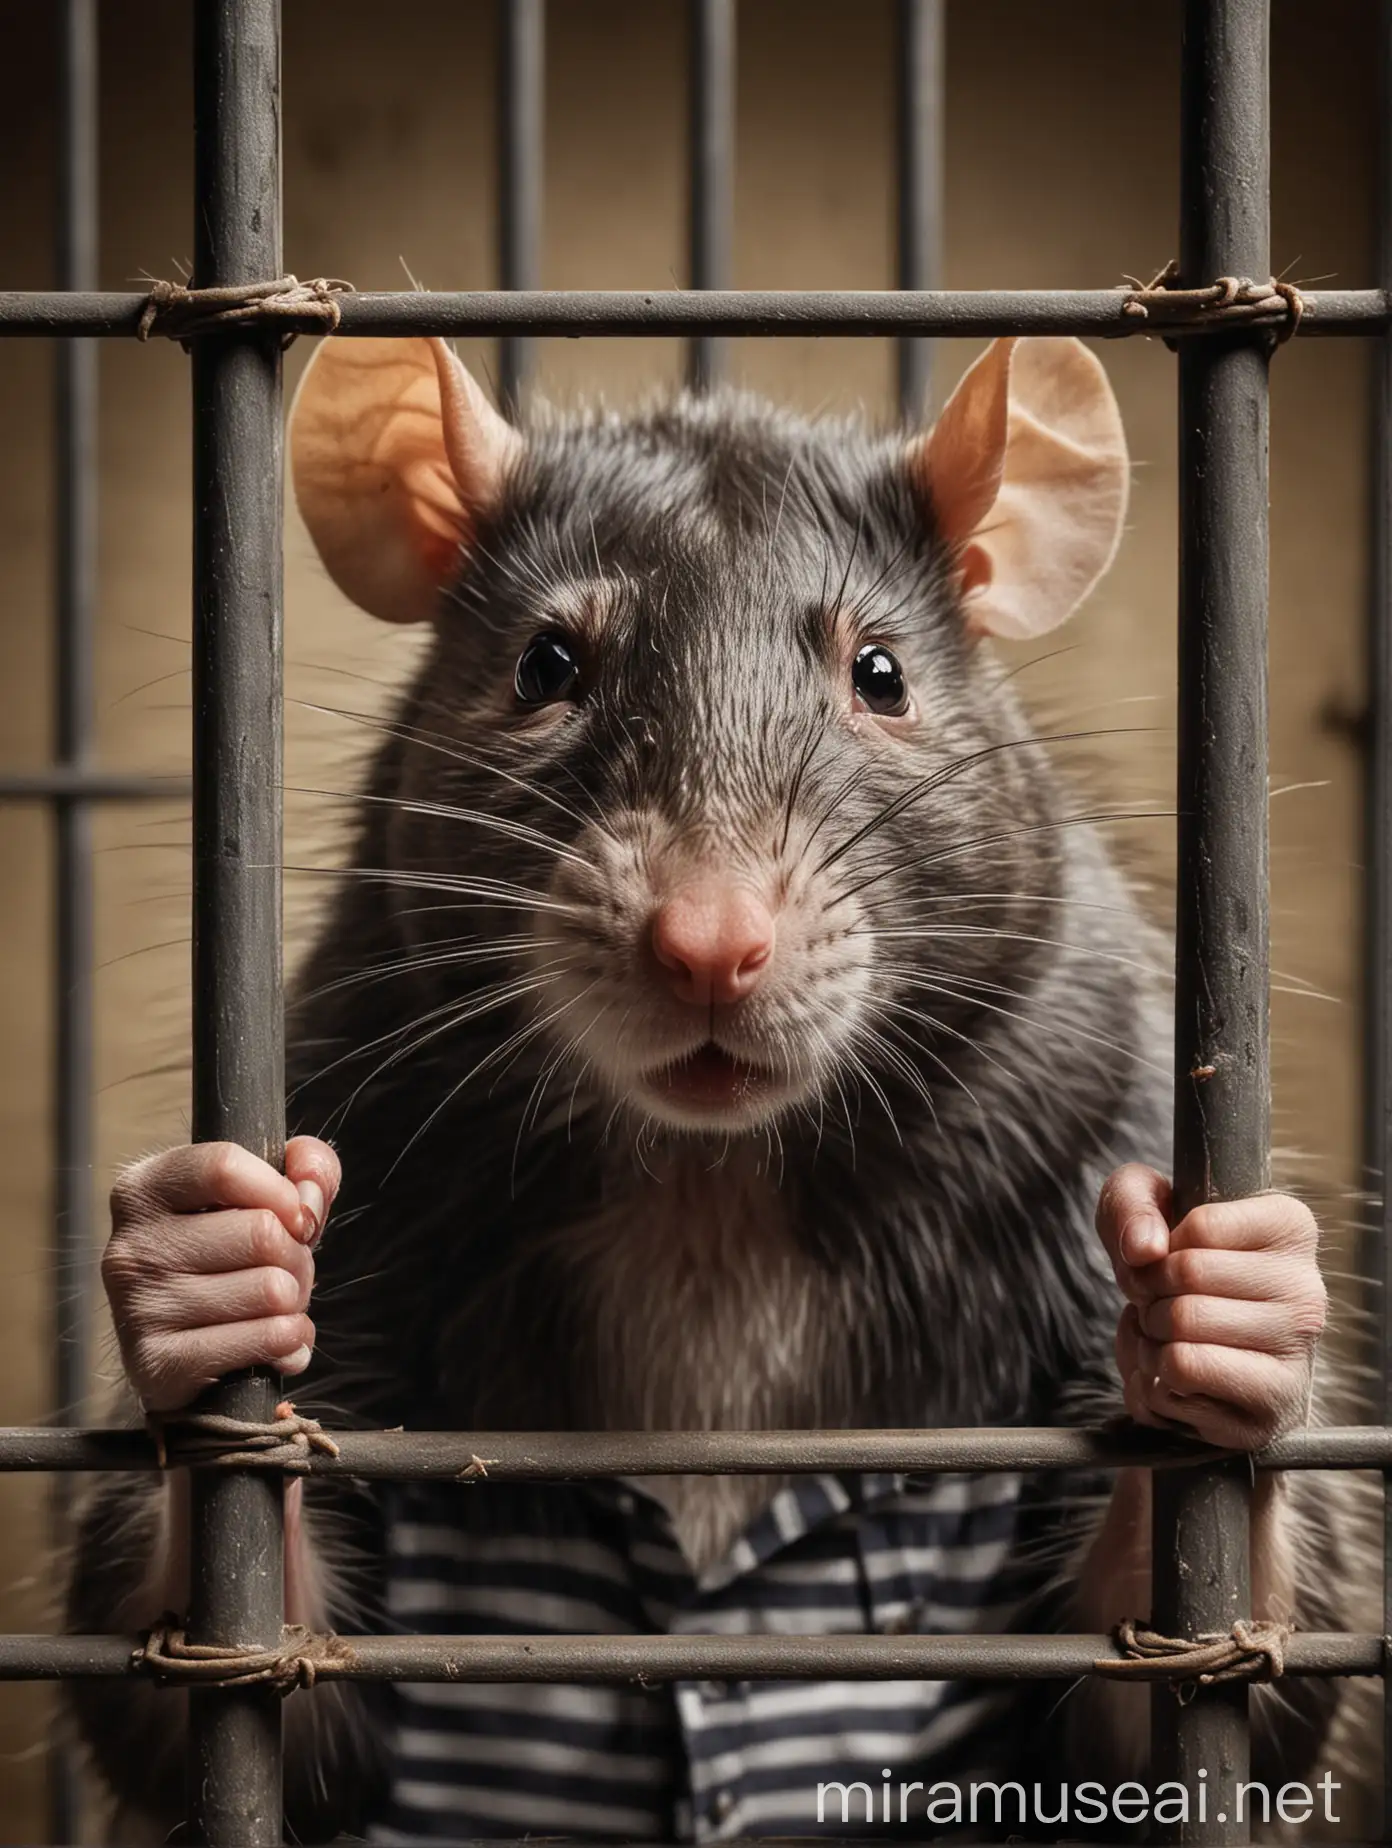 a gangster rat behind bars in jail looking angry